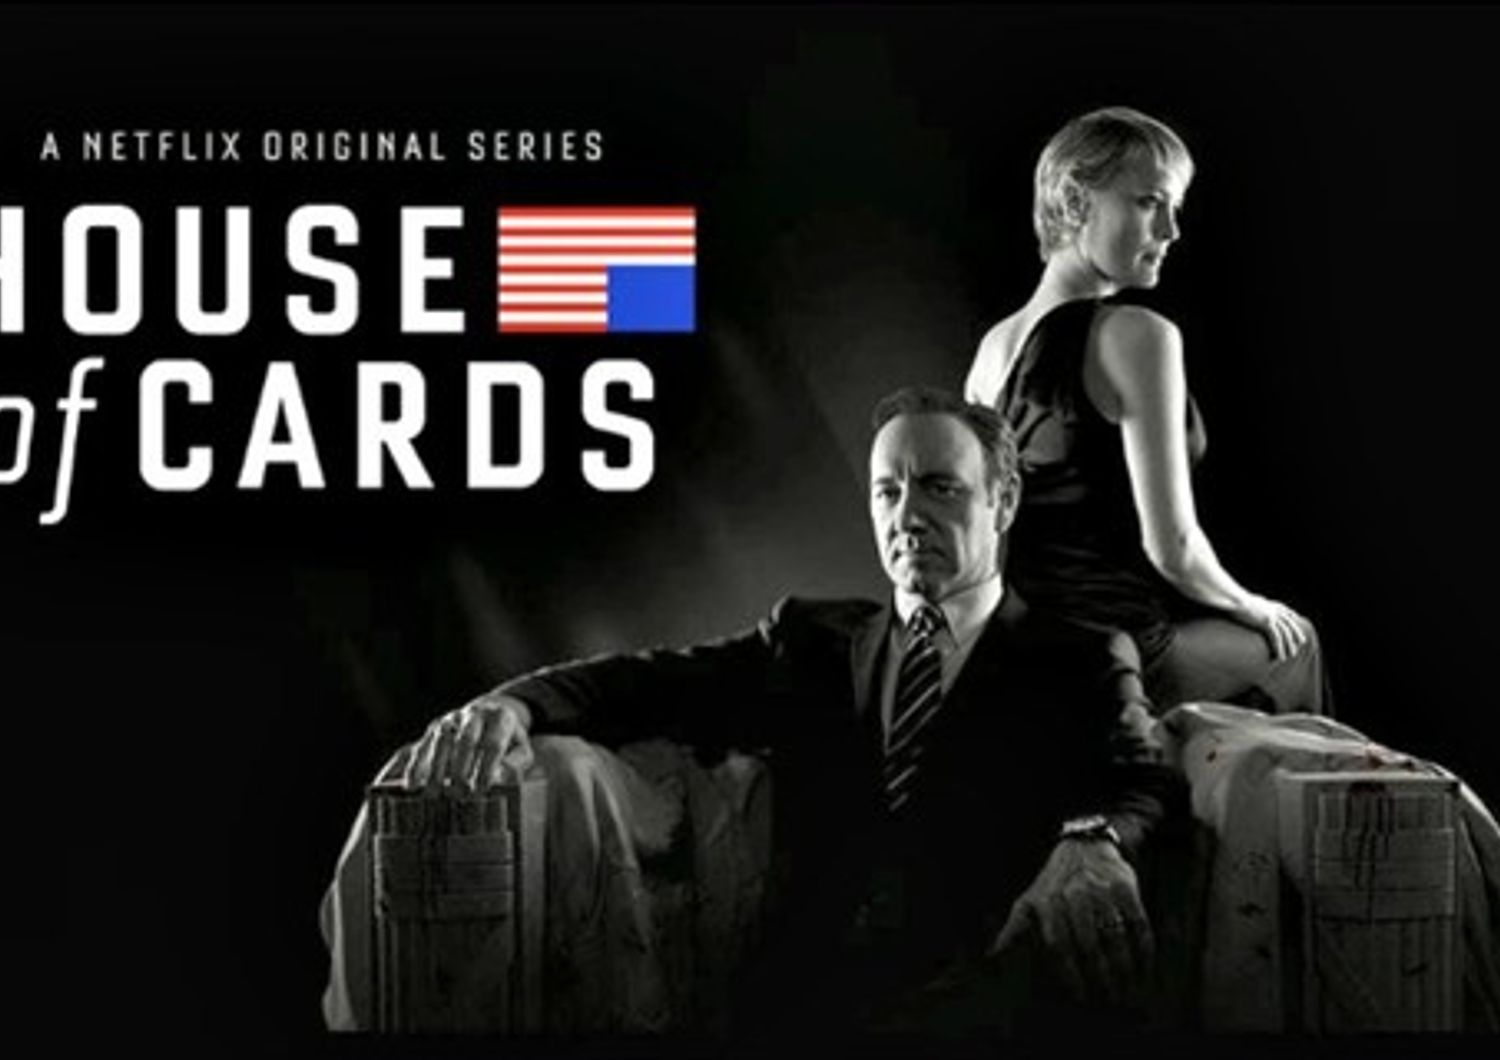 House of Cards chiuder&agrave; nel 2018. Coincidenza?